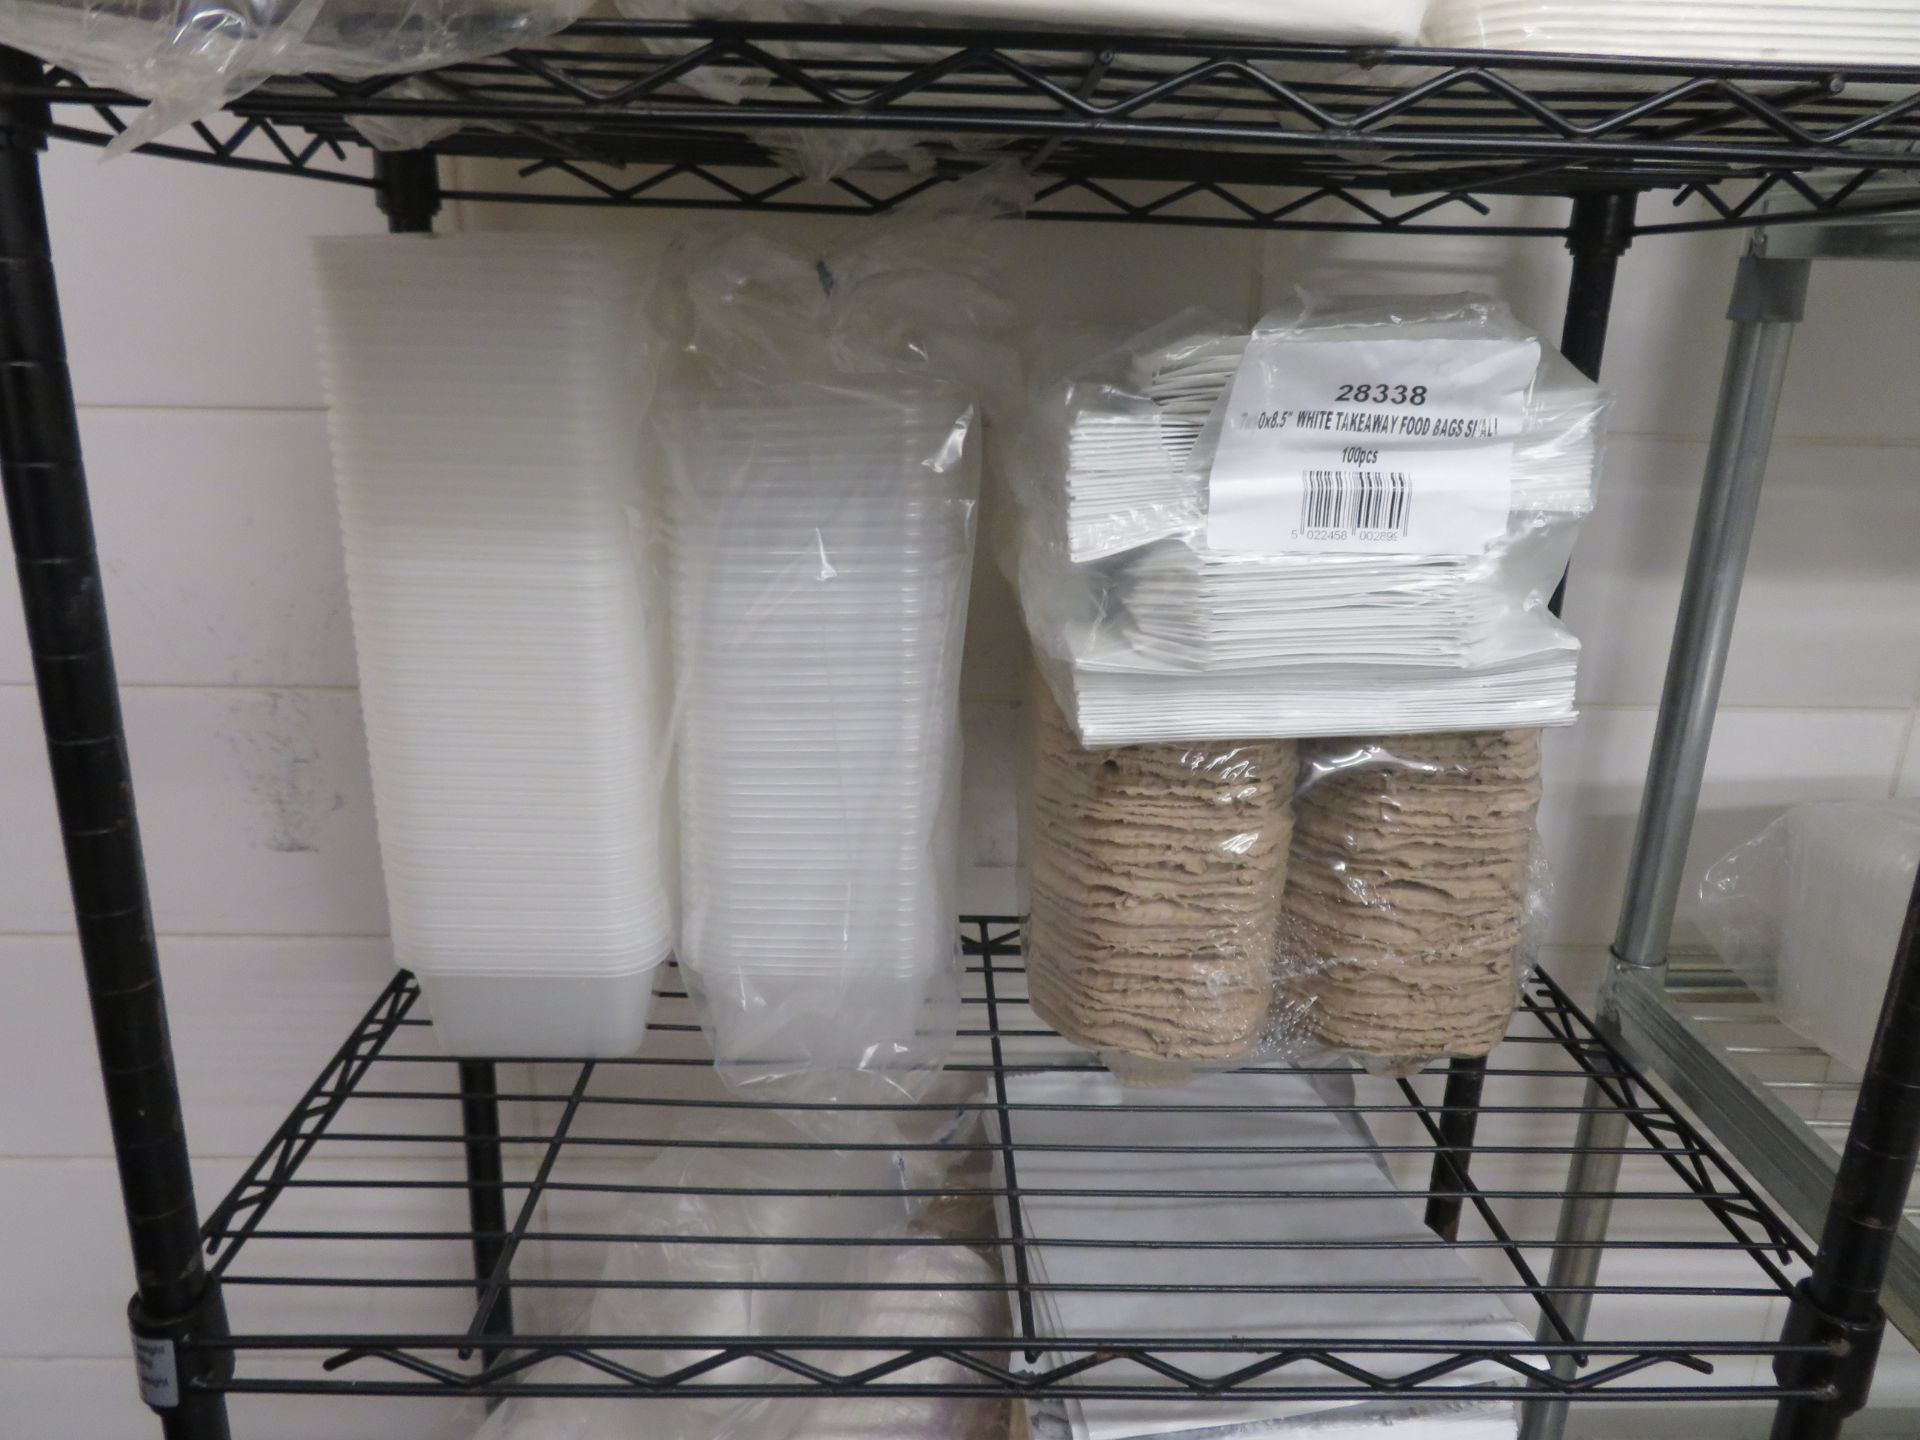 3 x Wire Shelf Units and a Qty of Take-Away Food Packaging - Image 6 of 7